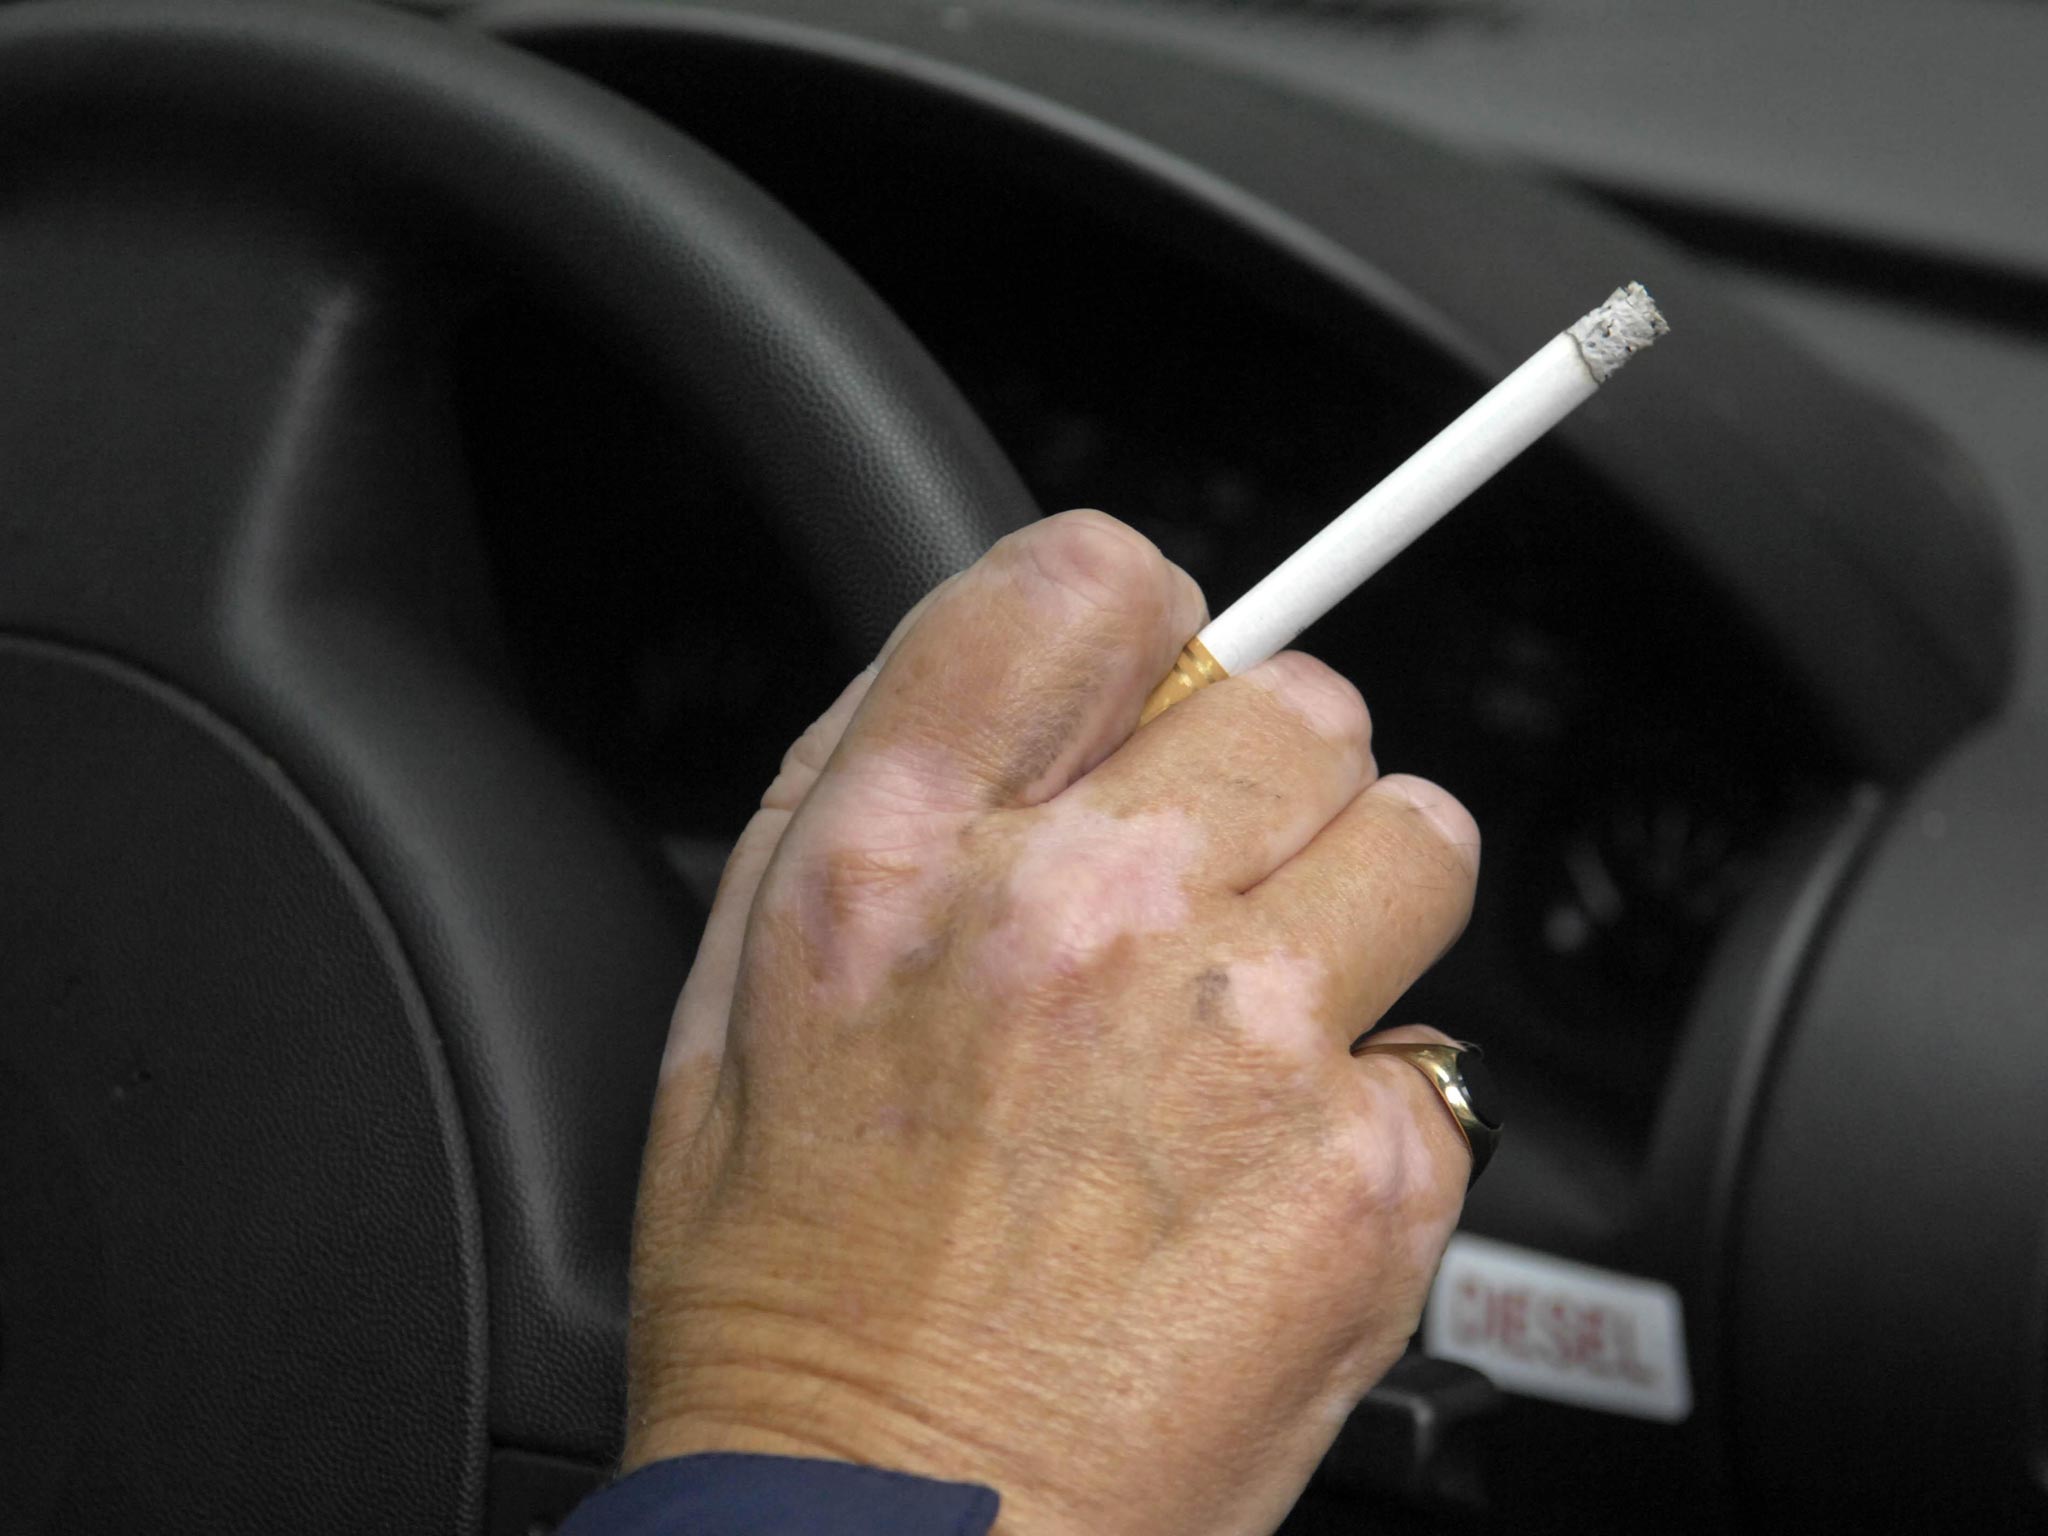 A ban will now be put in place to stop drivers from smoking if they are carrying children in their cars